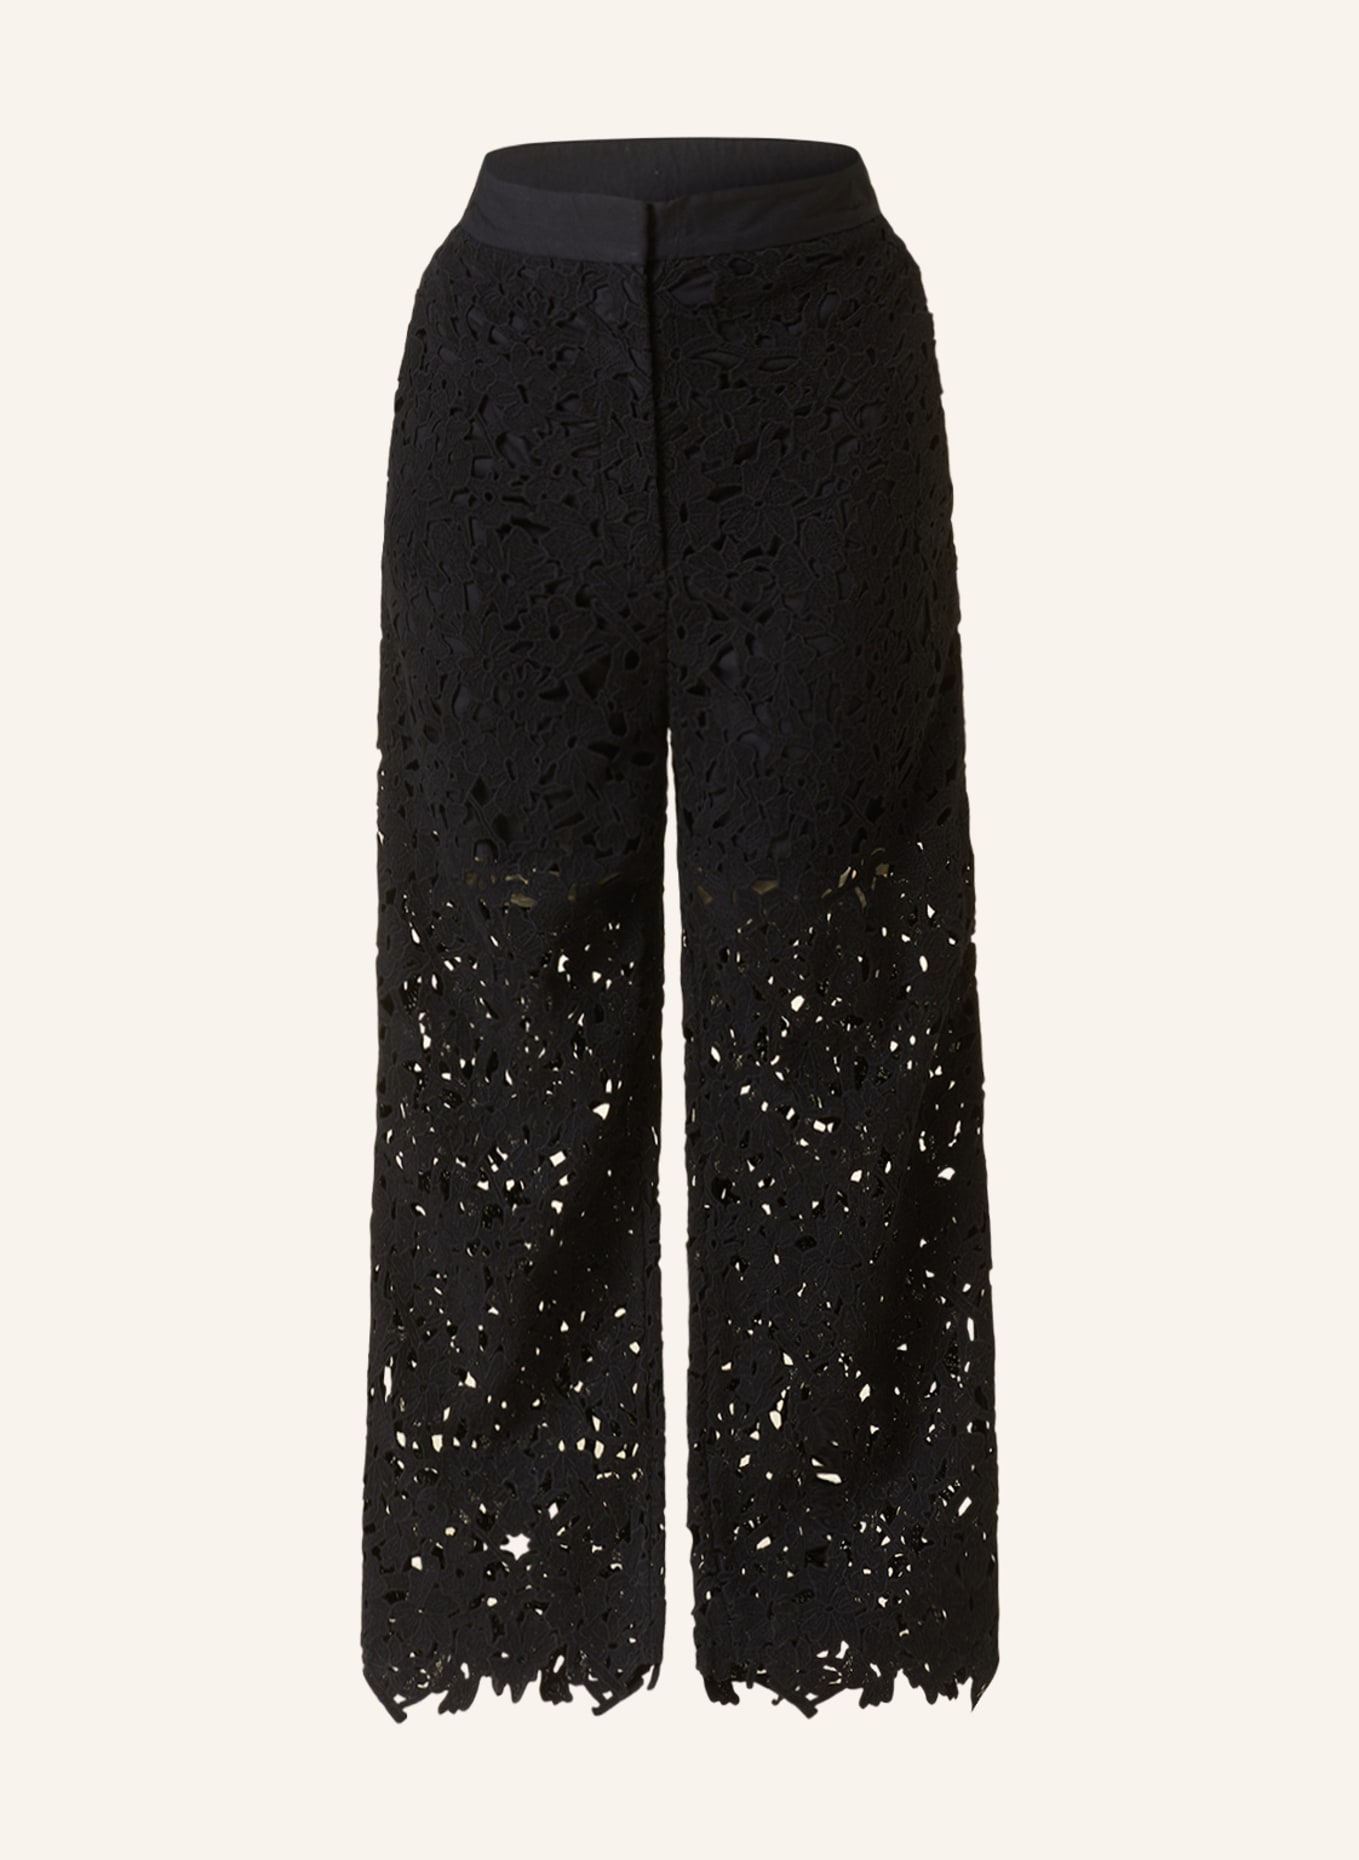 COS 7/8 trousers made of crochet lace, Color: BLACK (Image 1)